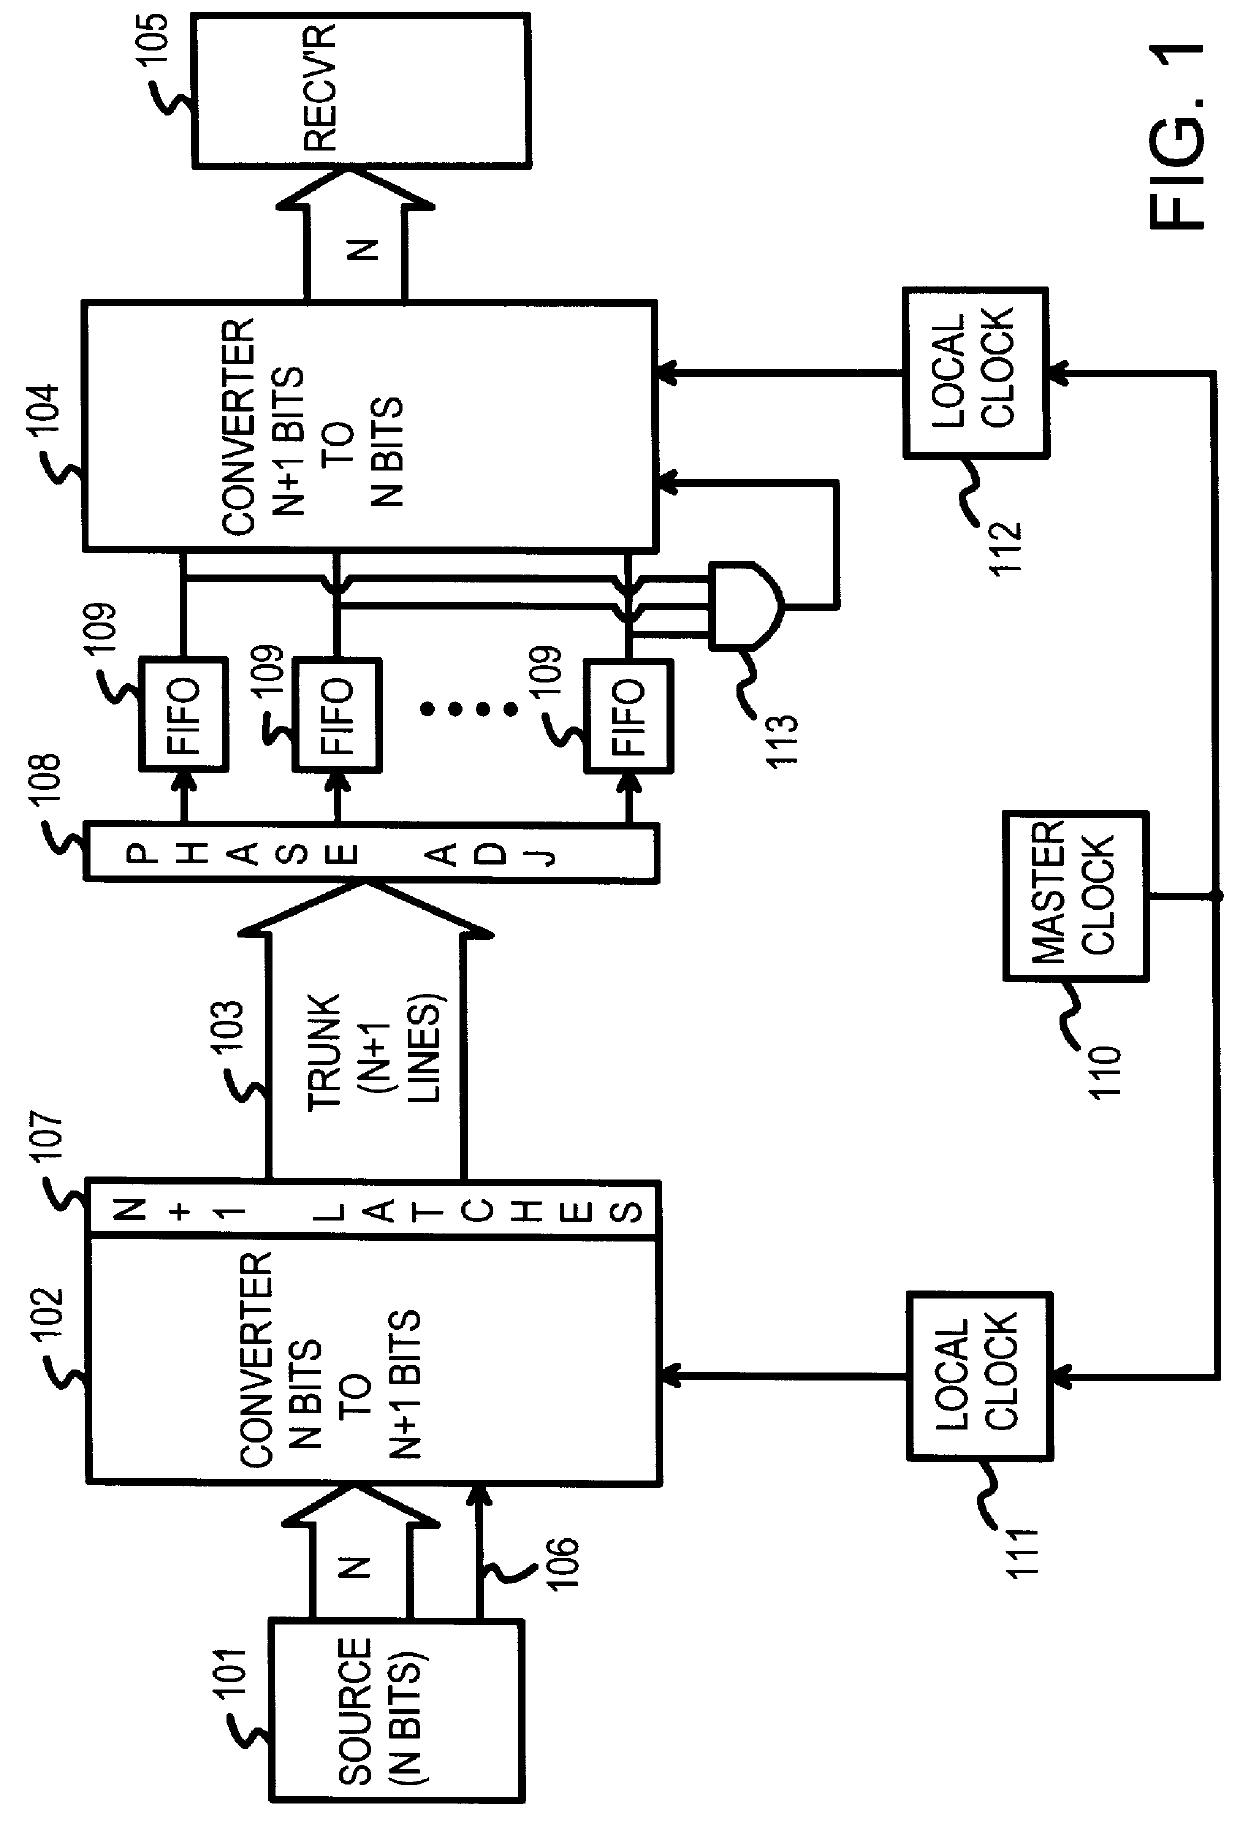 Hybrid interface for packet data switching